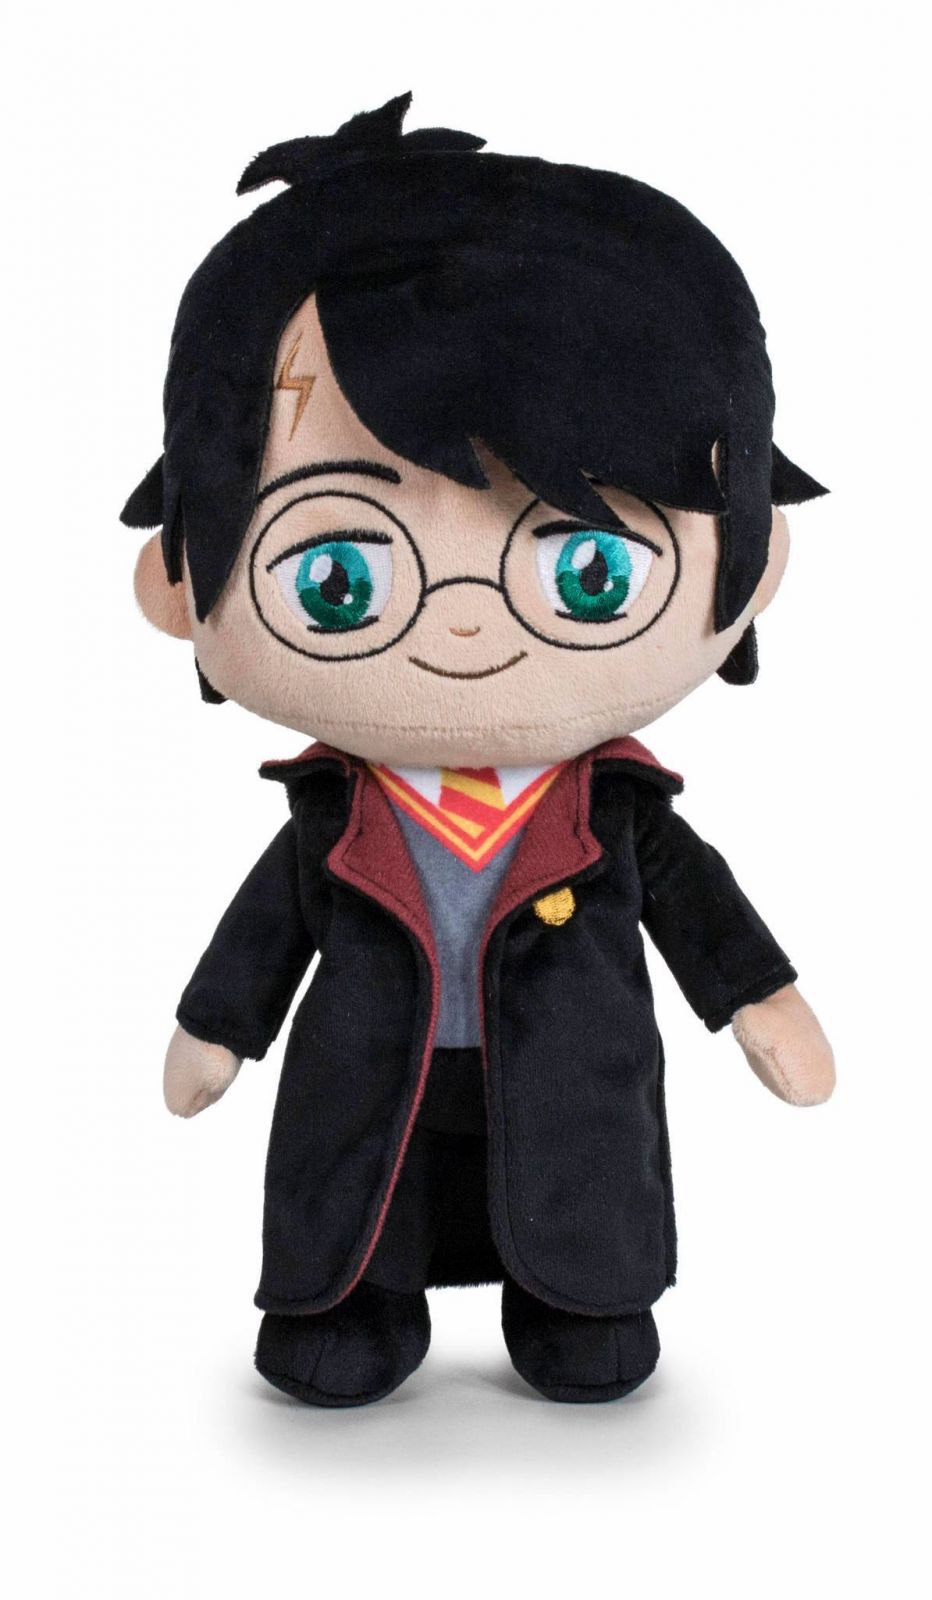 Harry Potter Plush Figures Assortment Harry Potter 20 cm (24) Play by Play